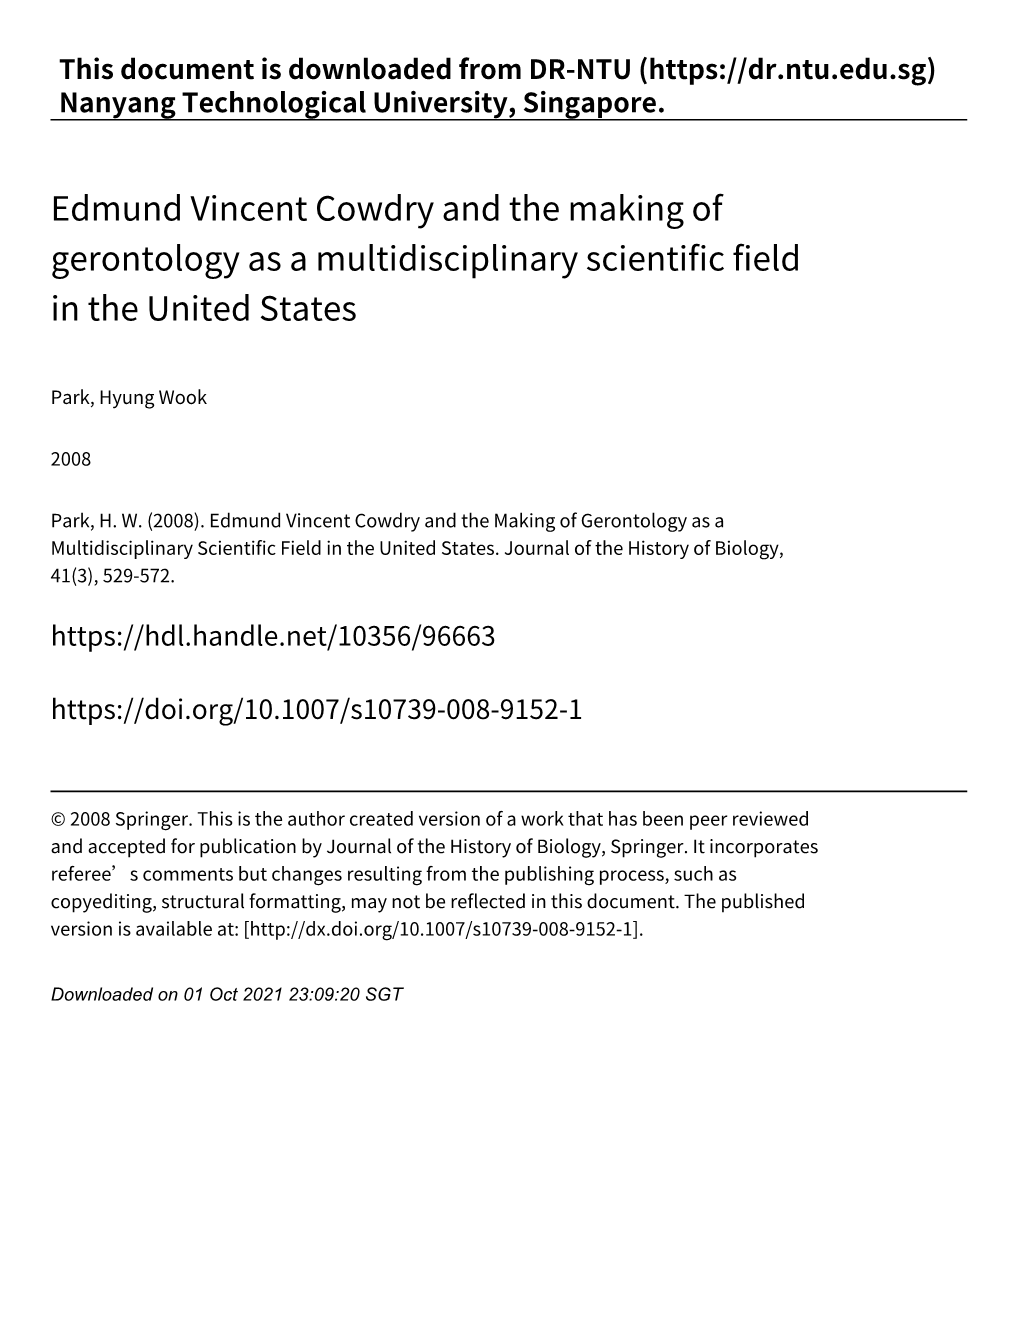 Edmund Vincent Cowdry and the Making of Gerontology As a Multidisciplinary Scientific Field in the United States